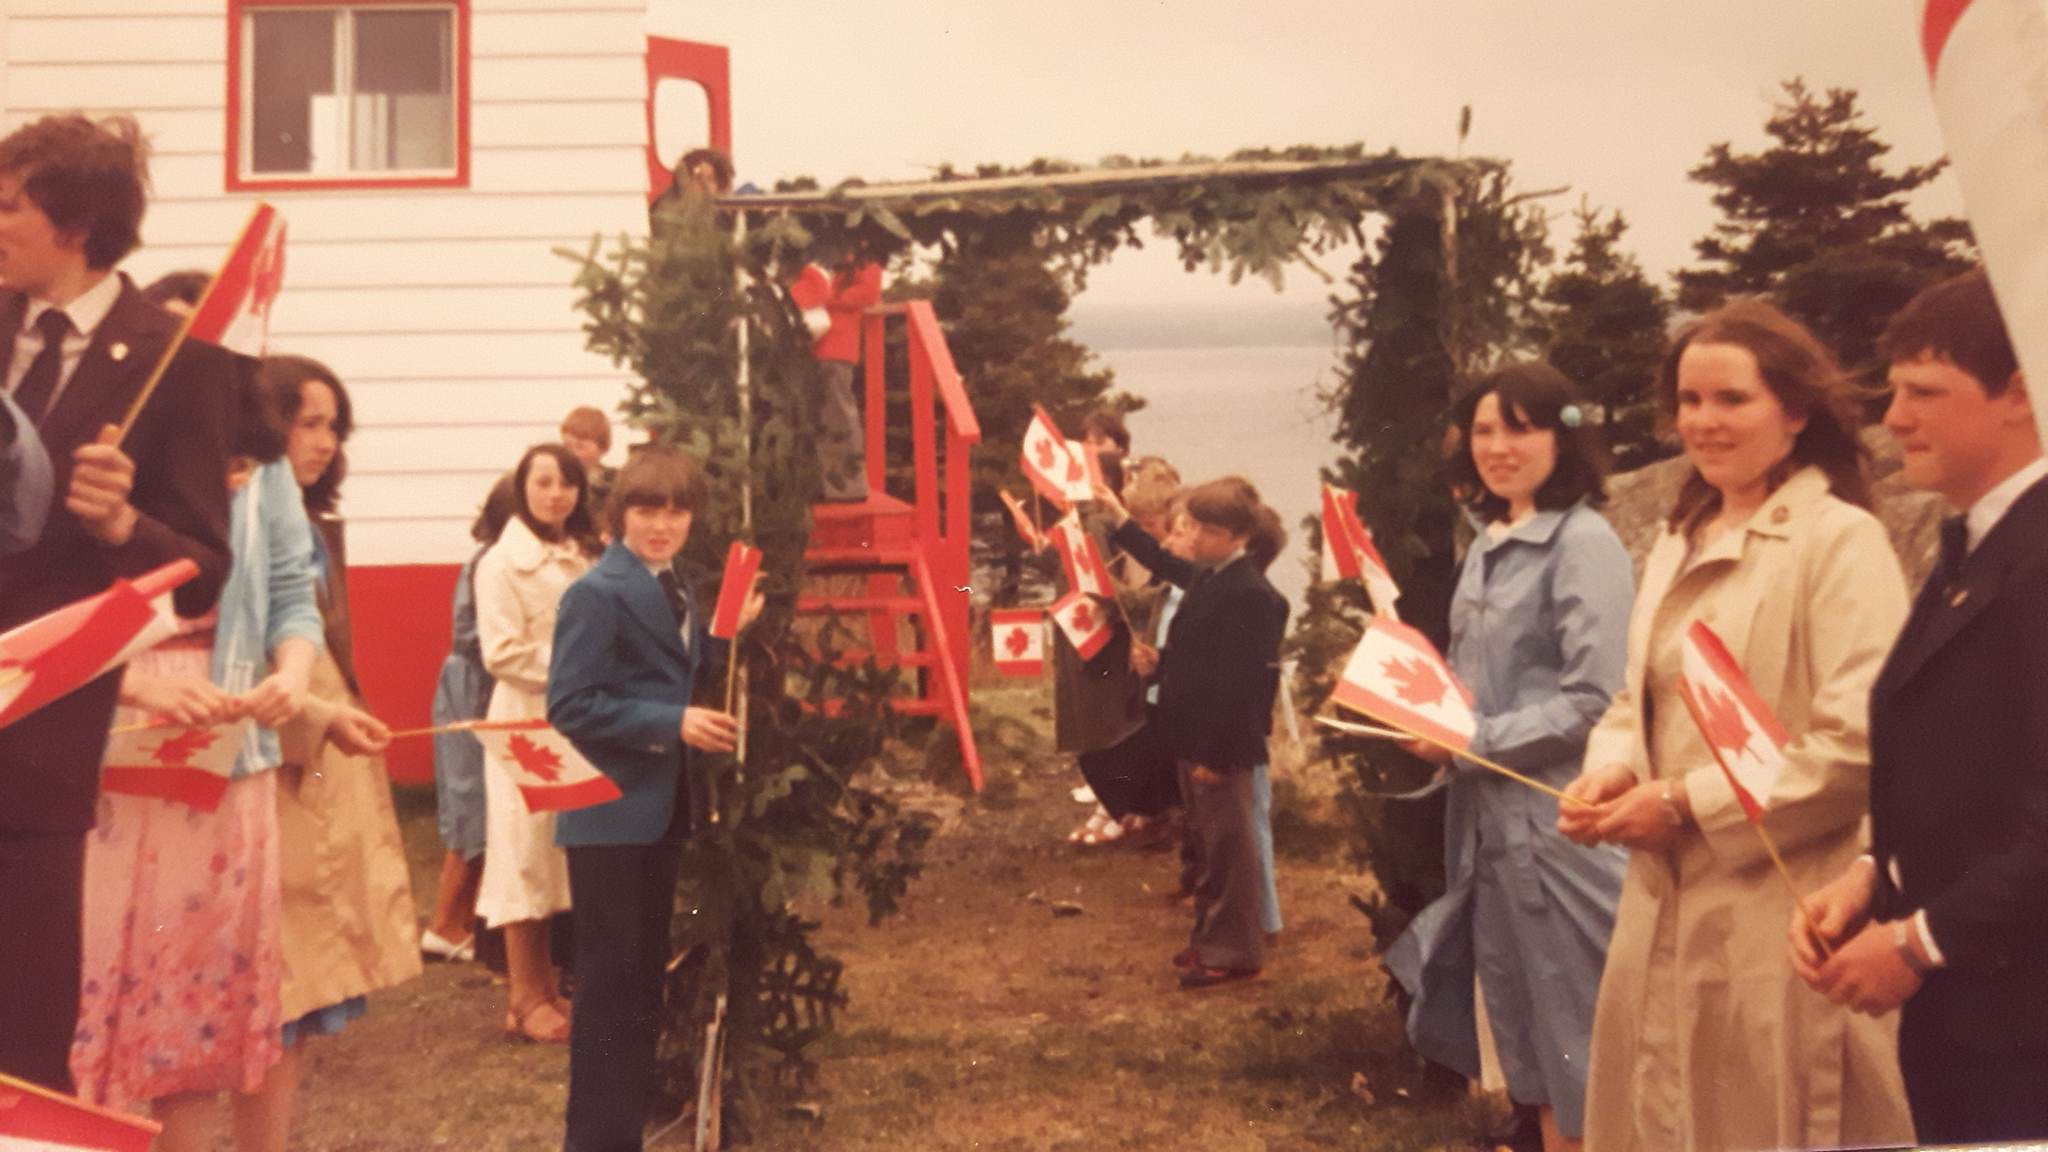 School children stand under an archway made of evergreen boughs awaiting the arrival of the bishop